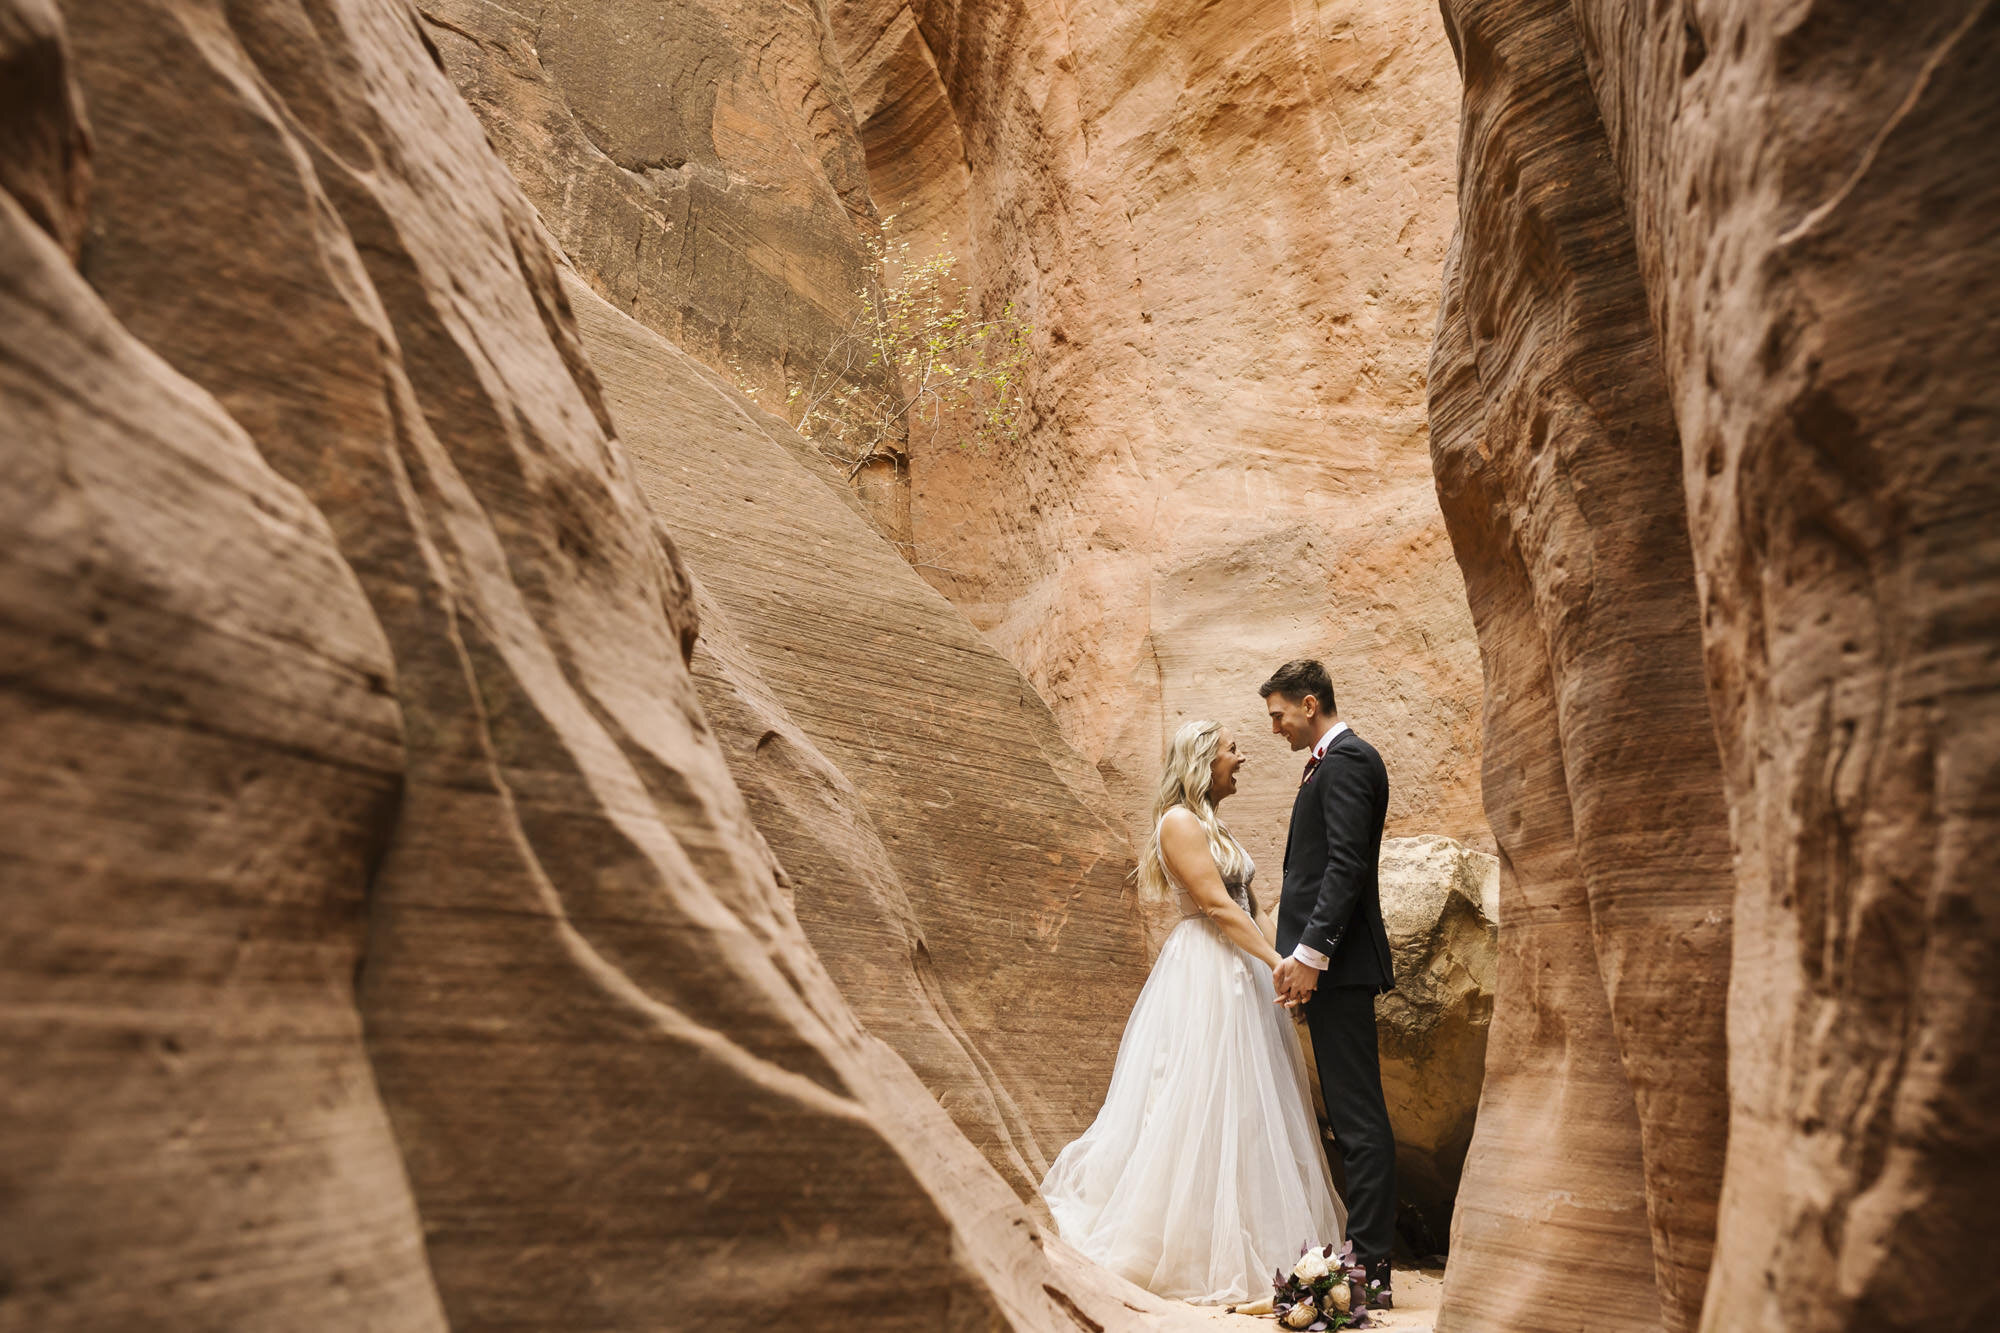 Bride and groom hold hands in a slot canyon in the Utah desert